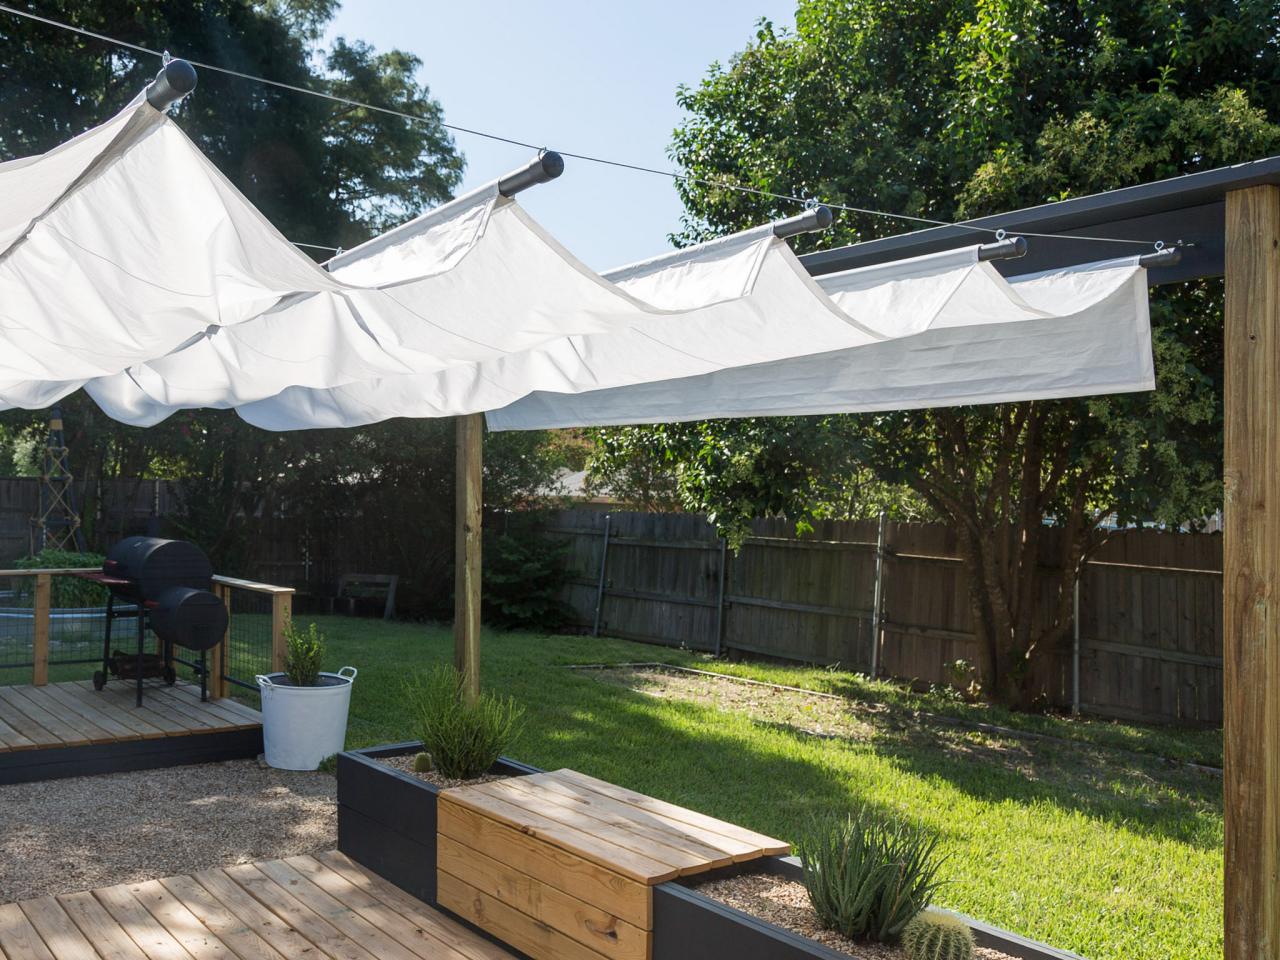 How To Make An Outdoor Canopy